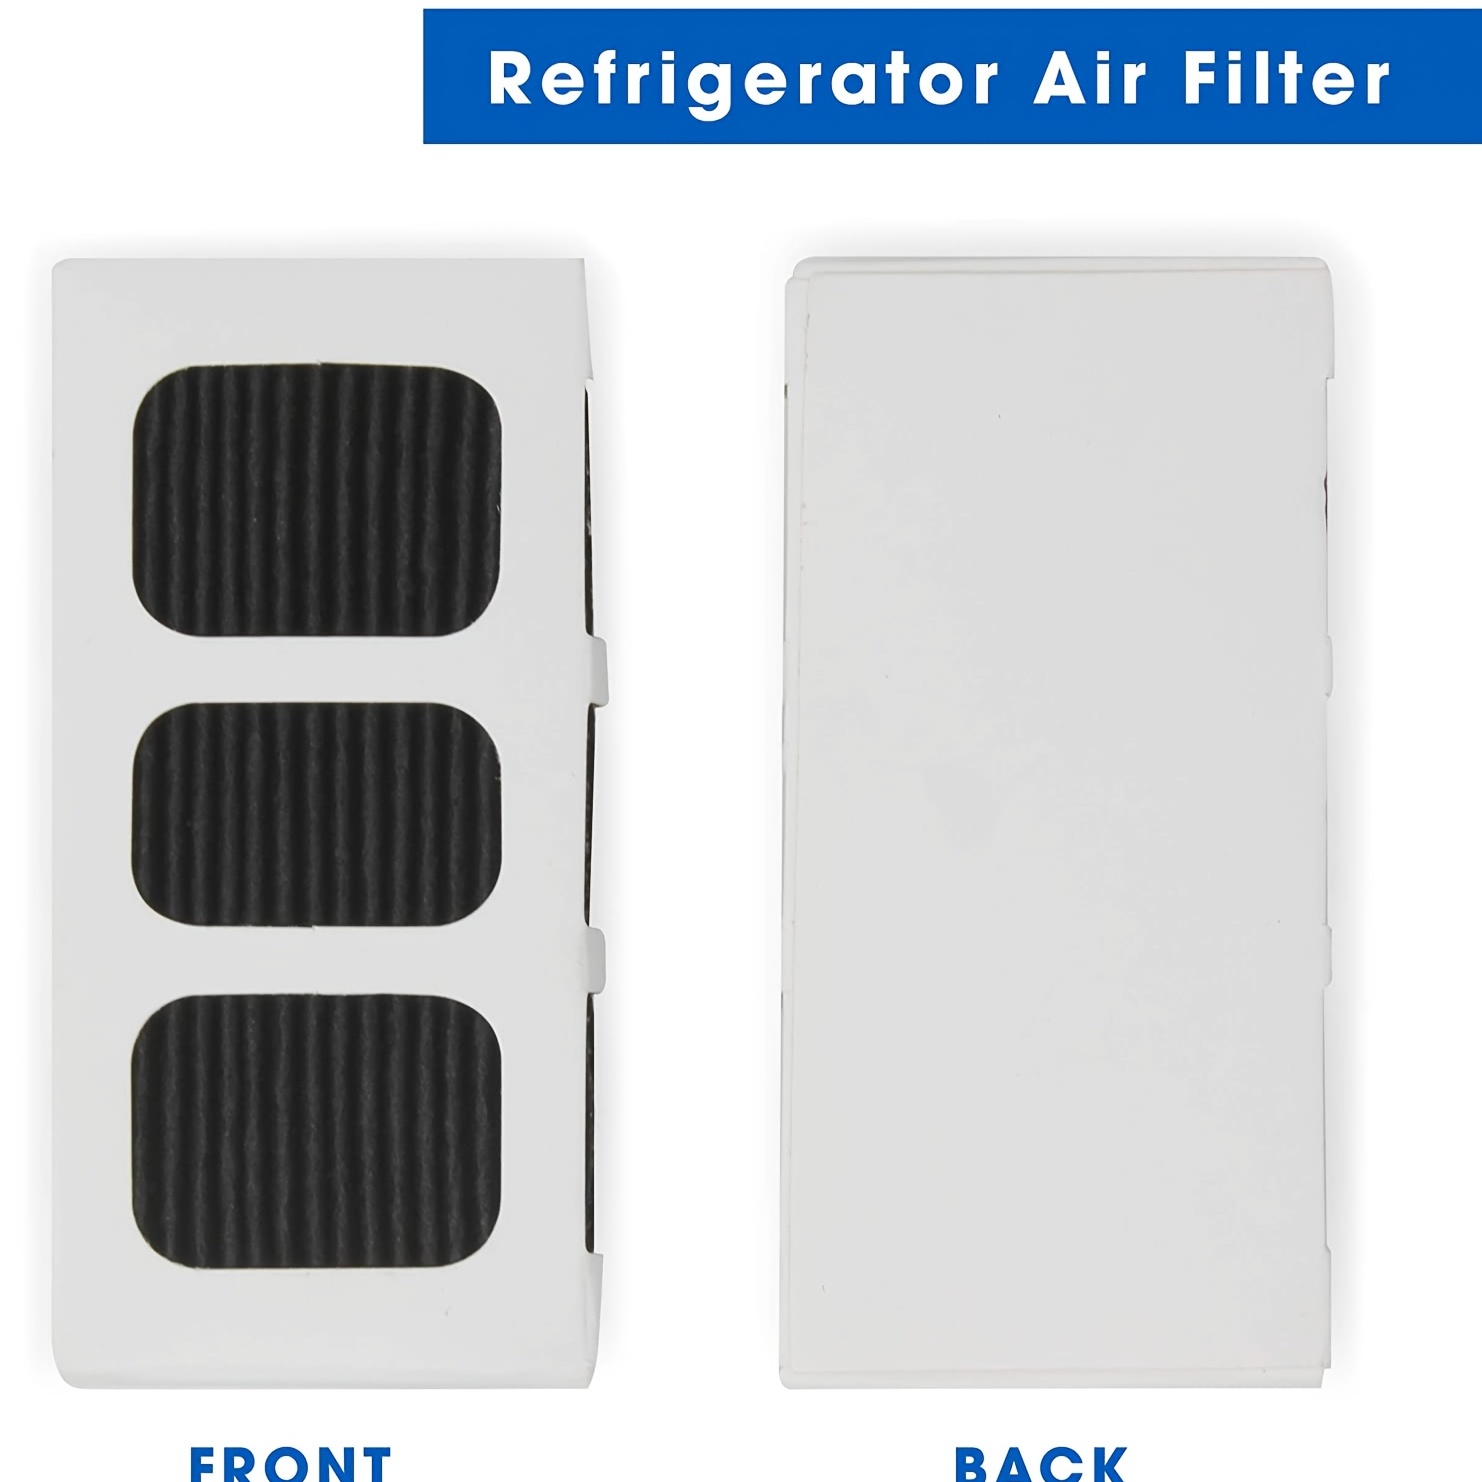 Replacement Air Filter for Paultra2 Refrigerator Air Filter Replacement for Frigidaire PureAir for PAULTRA 2 5303918847